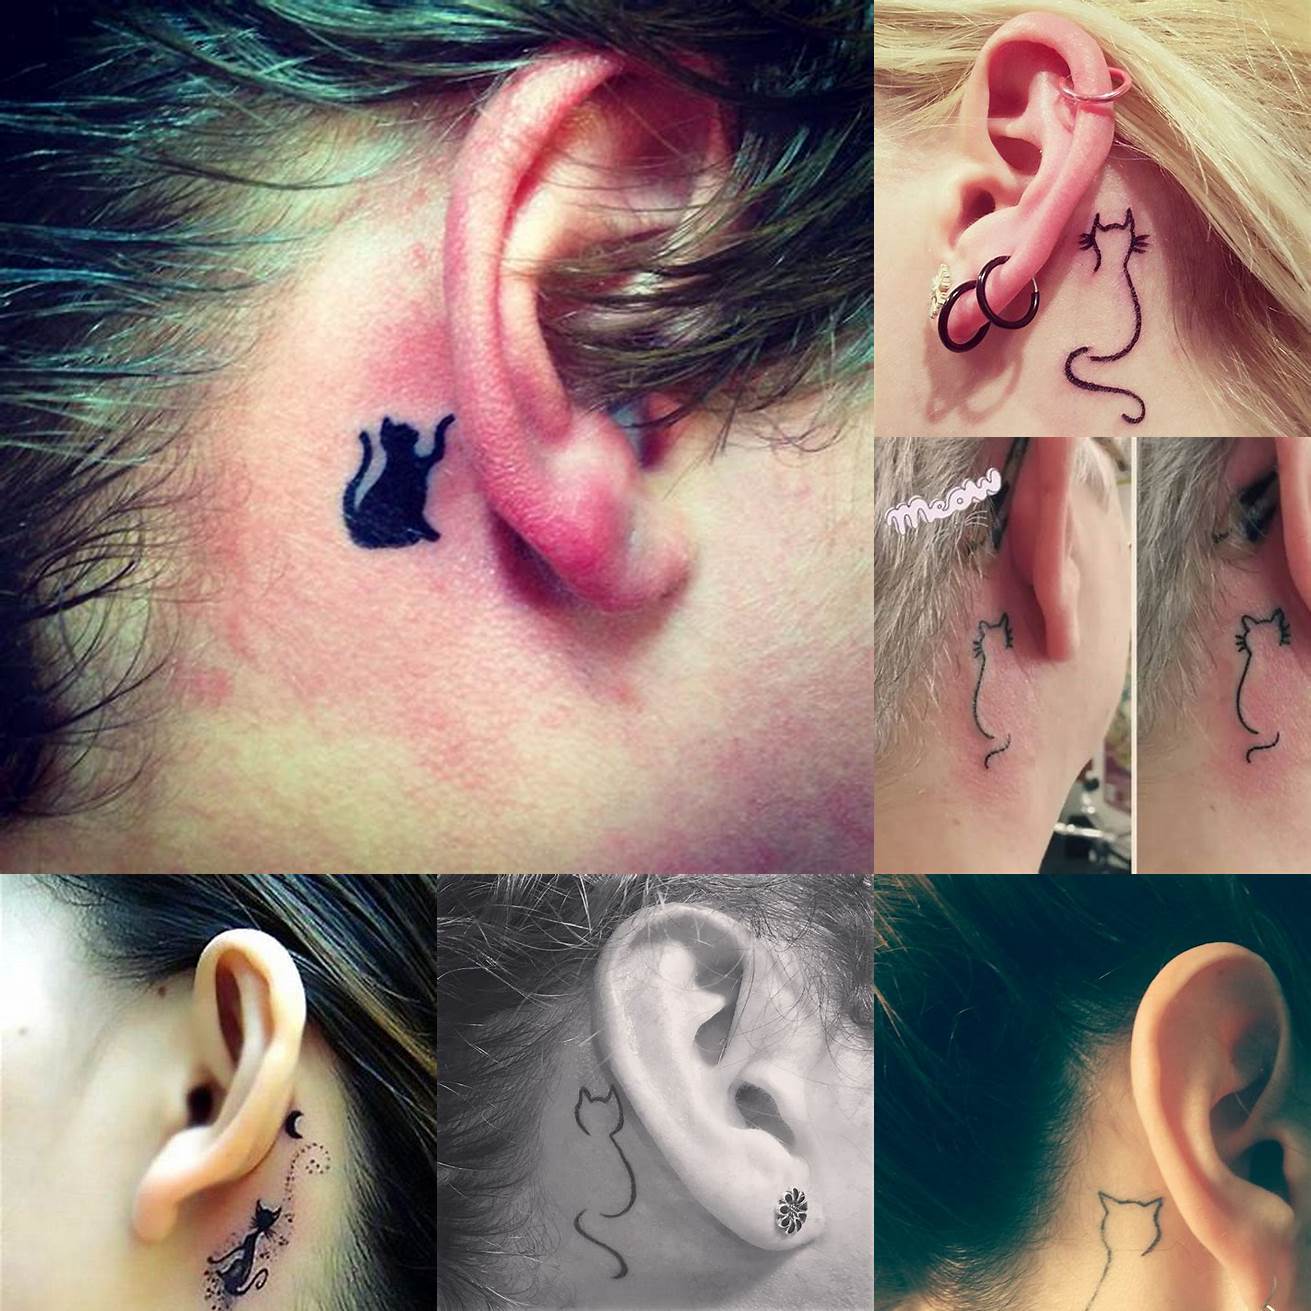 A cat behind the ear tattoo is a small and subtle design that can be easily hidden or shown off depending on your preference